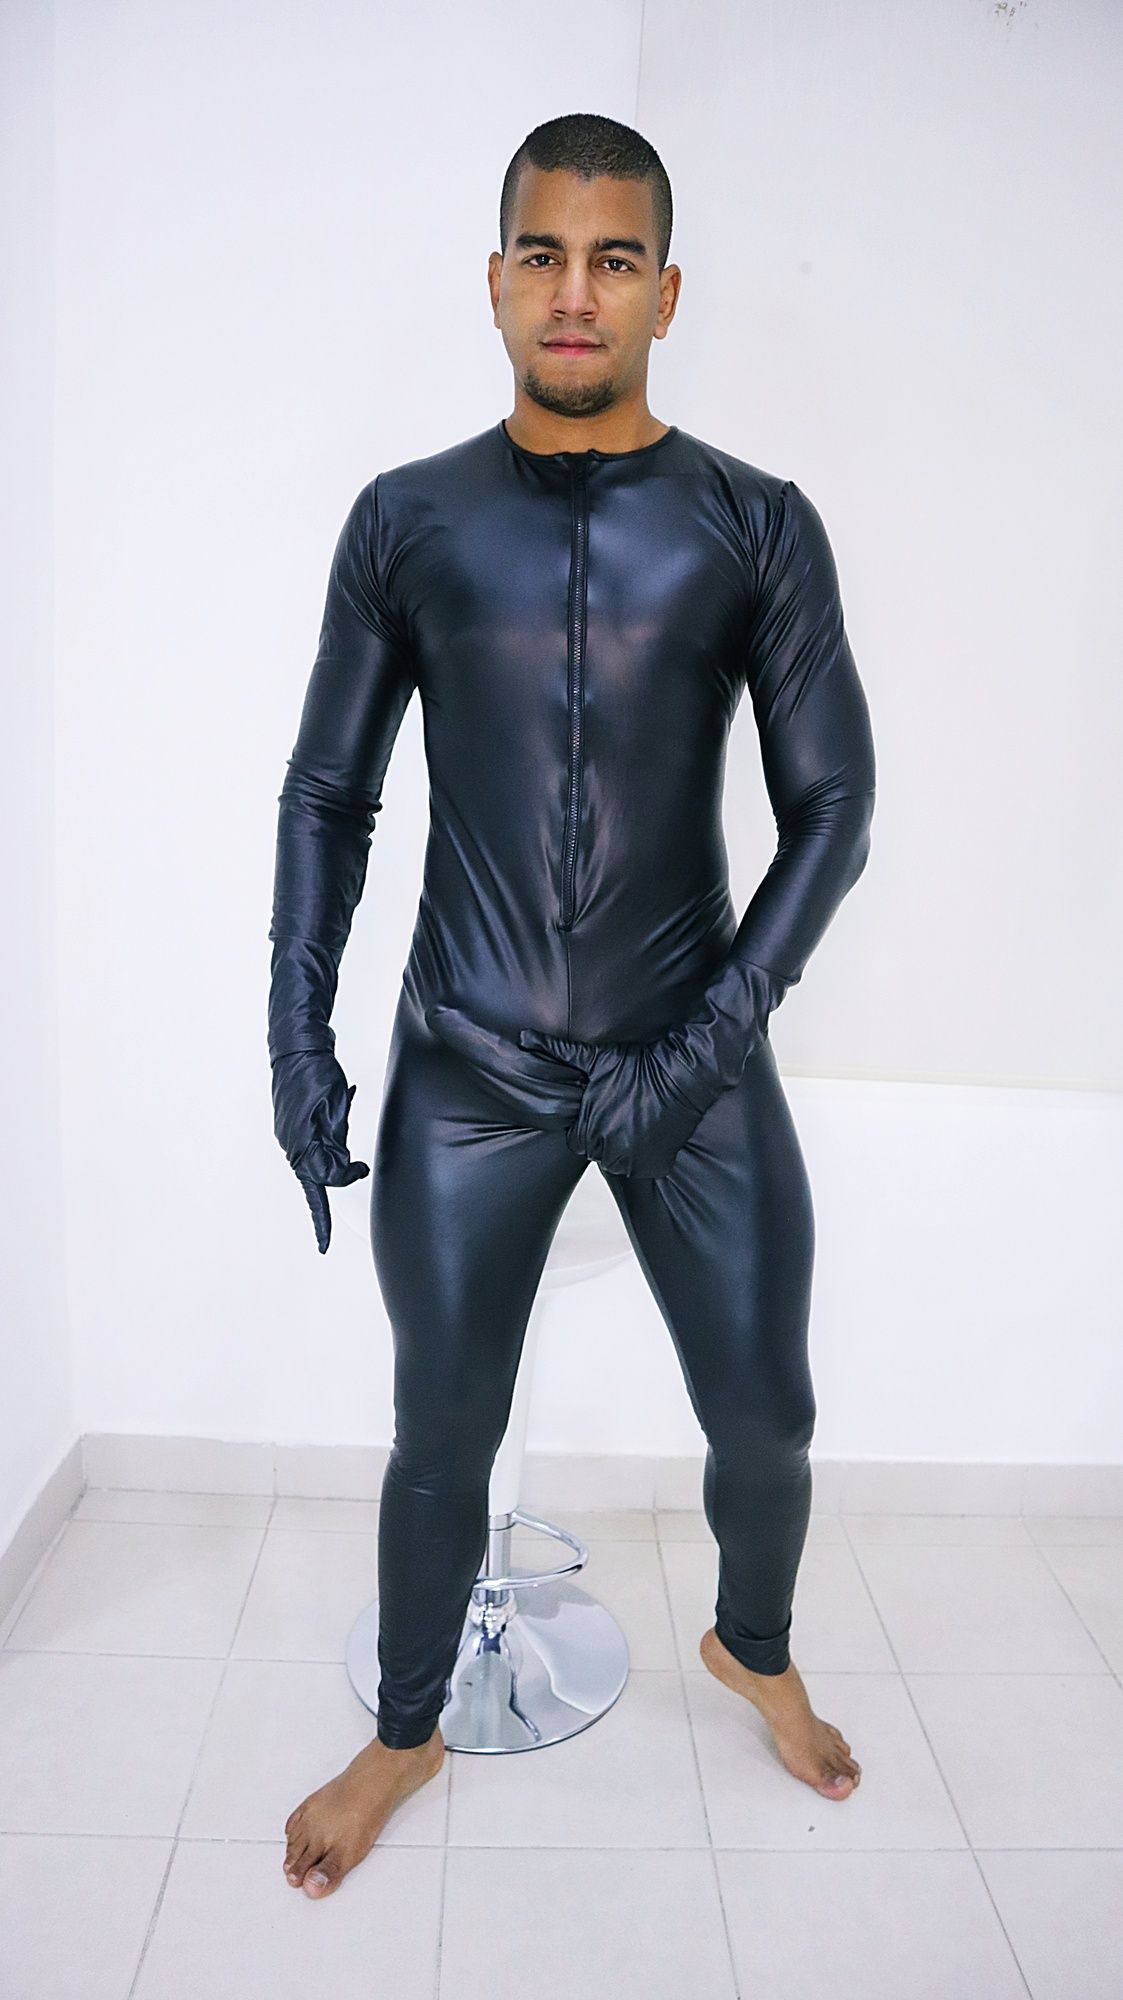 The rubber dom #4